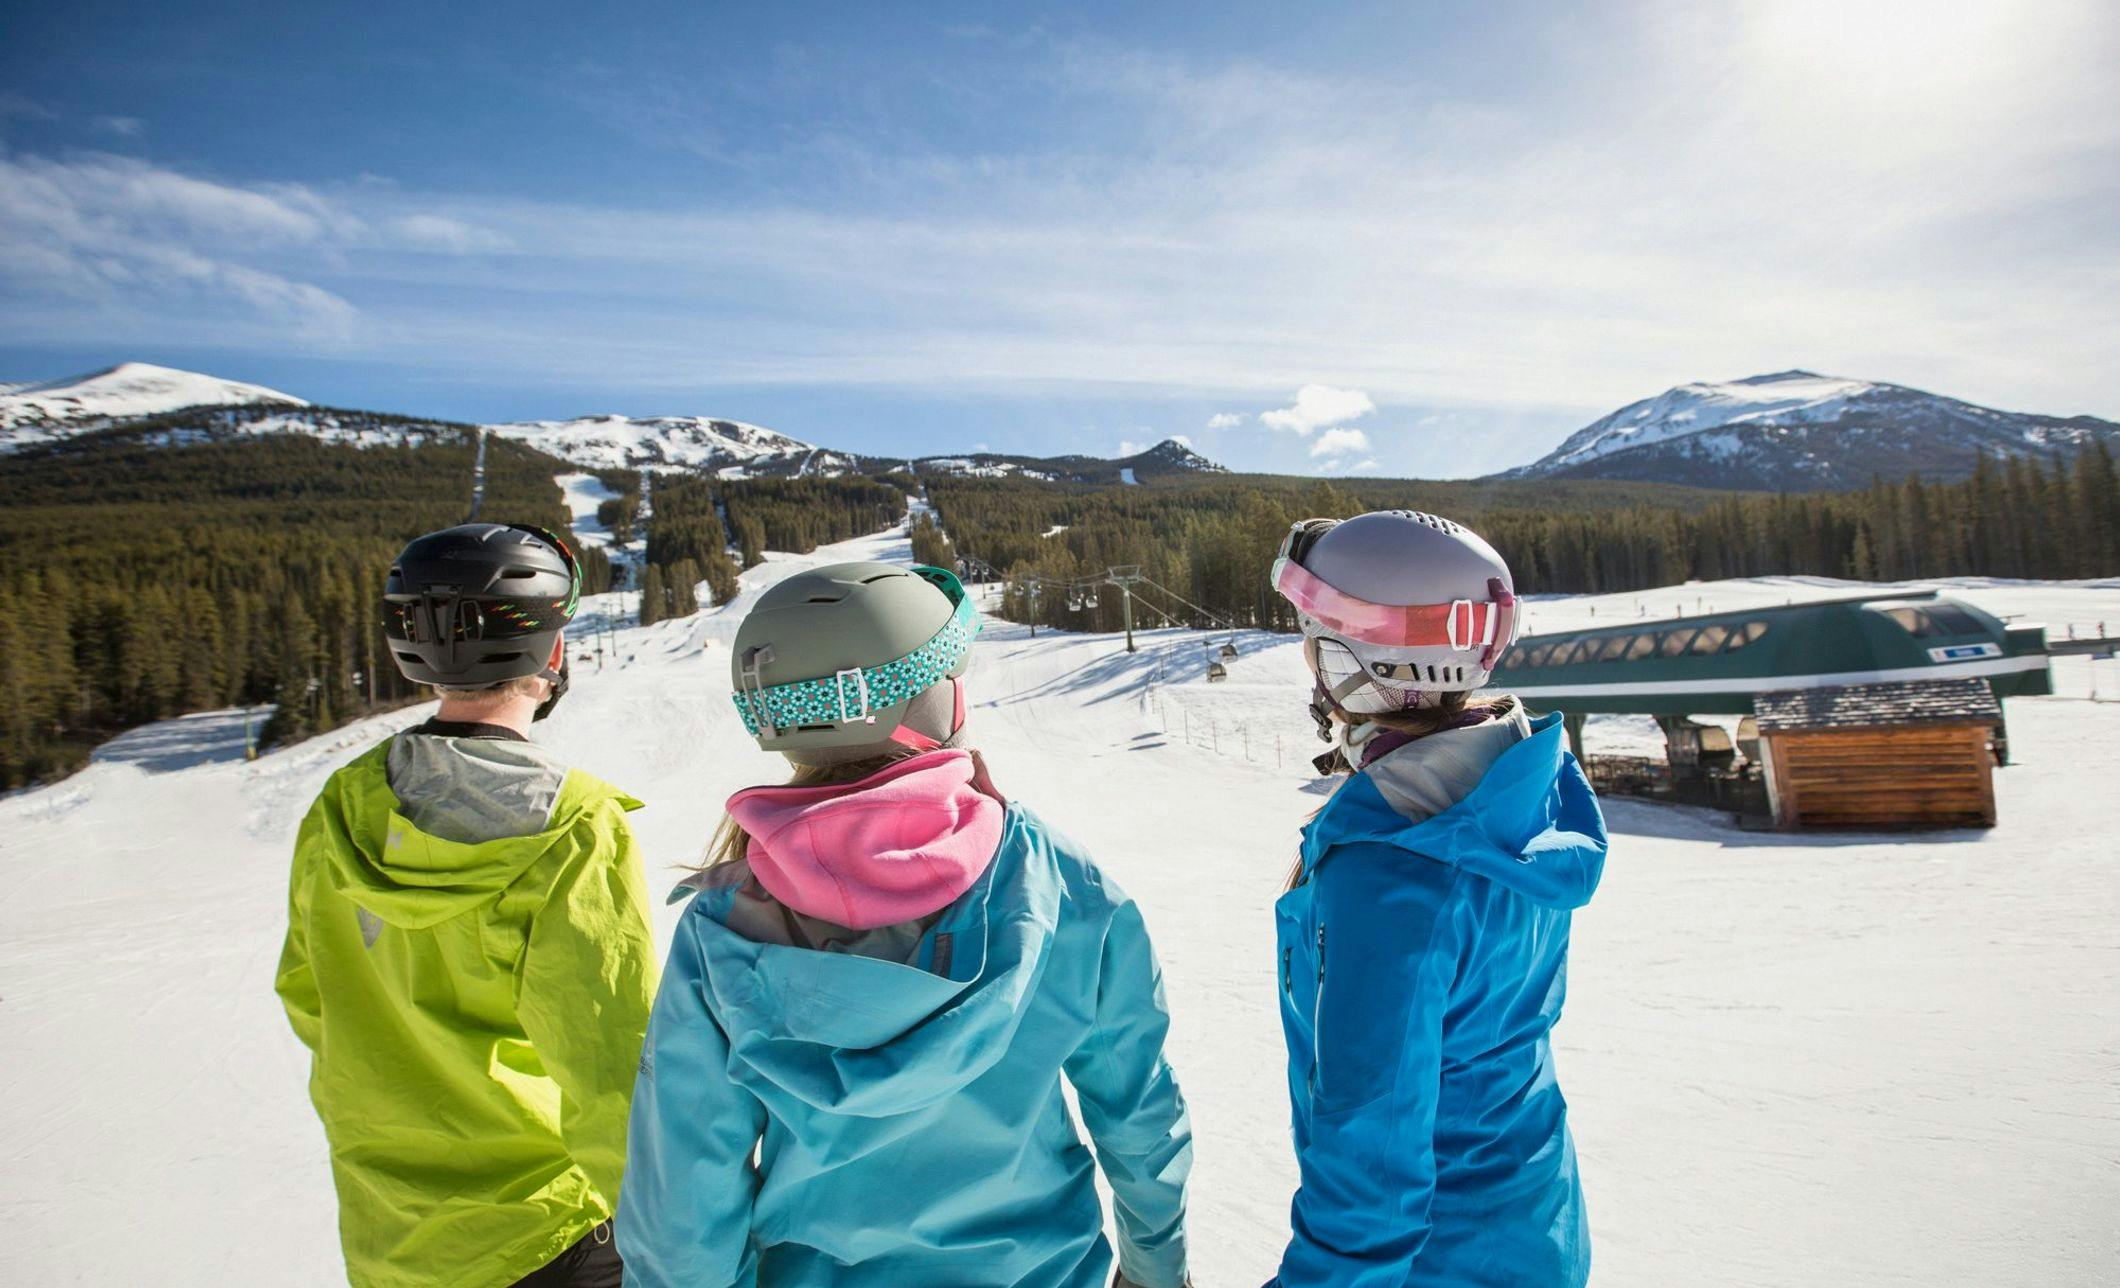 A small group of skiers/snowboarders stand together looking down at the ski terrain on a beautiful day with clear blue skies